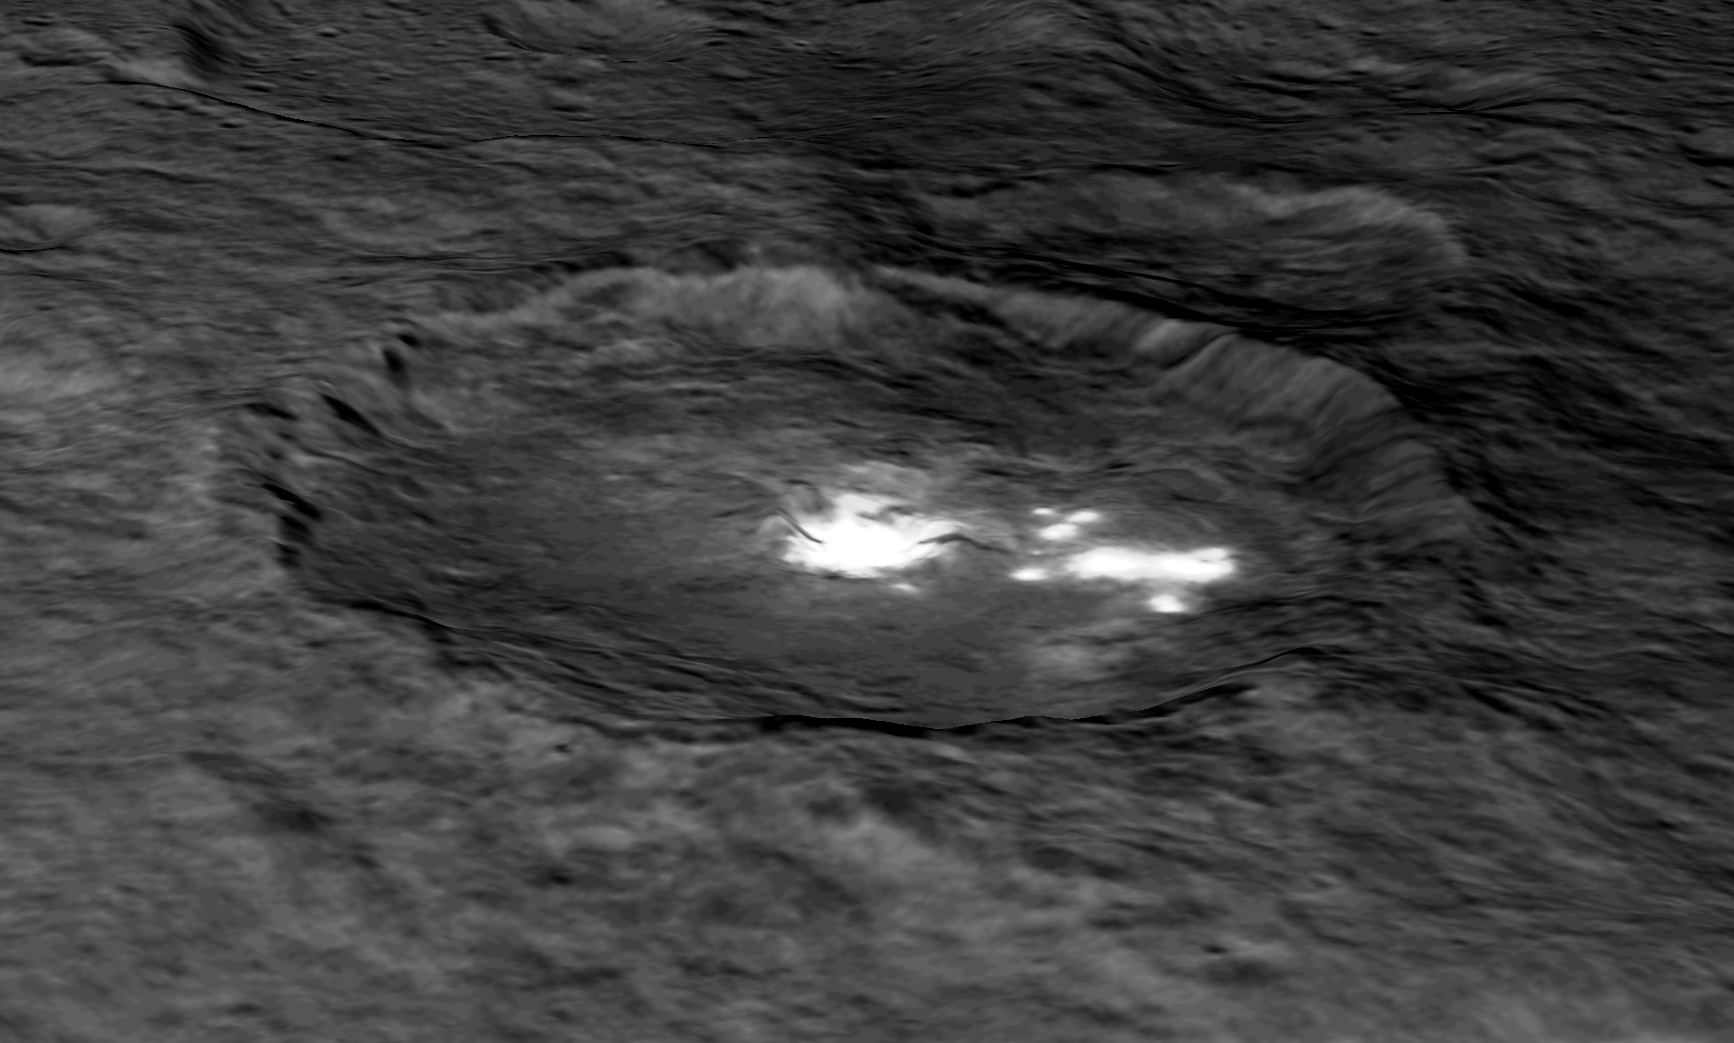 An image of Occator Crater draped over a digital terrain model provides a 3-D-like perspective view of the impact structure.  Several bright areas can be seen in this crater. The inner part of the crater forms a type of “crater within a crater” measuring about 6 miles (10 kilometers) in diameter and 0.3 miles (0.5 miles) in depth, and contains the brightest material on all of Ceres. Occator measures about 60 miles (90 kilometers) wide.  Credits: NASA/JPL-Caltech/UCLA/MPS/DLR/IDA